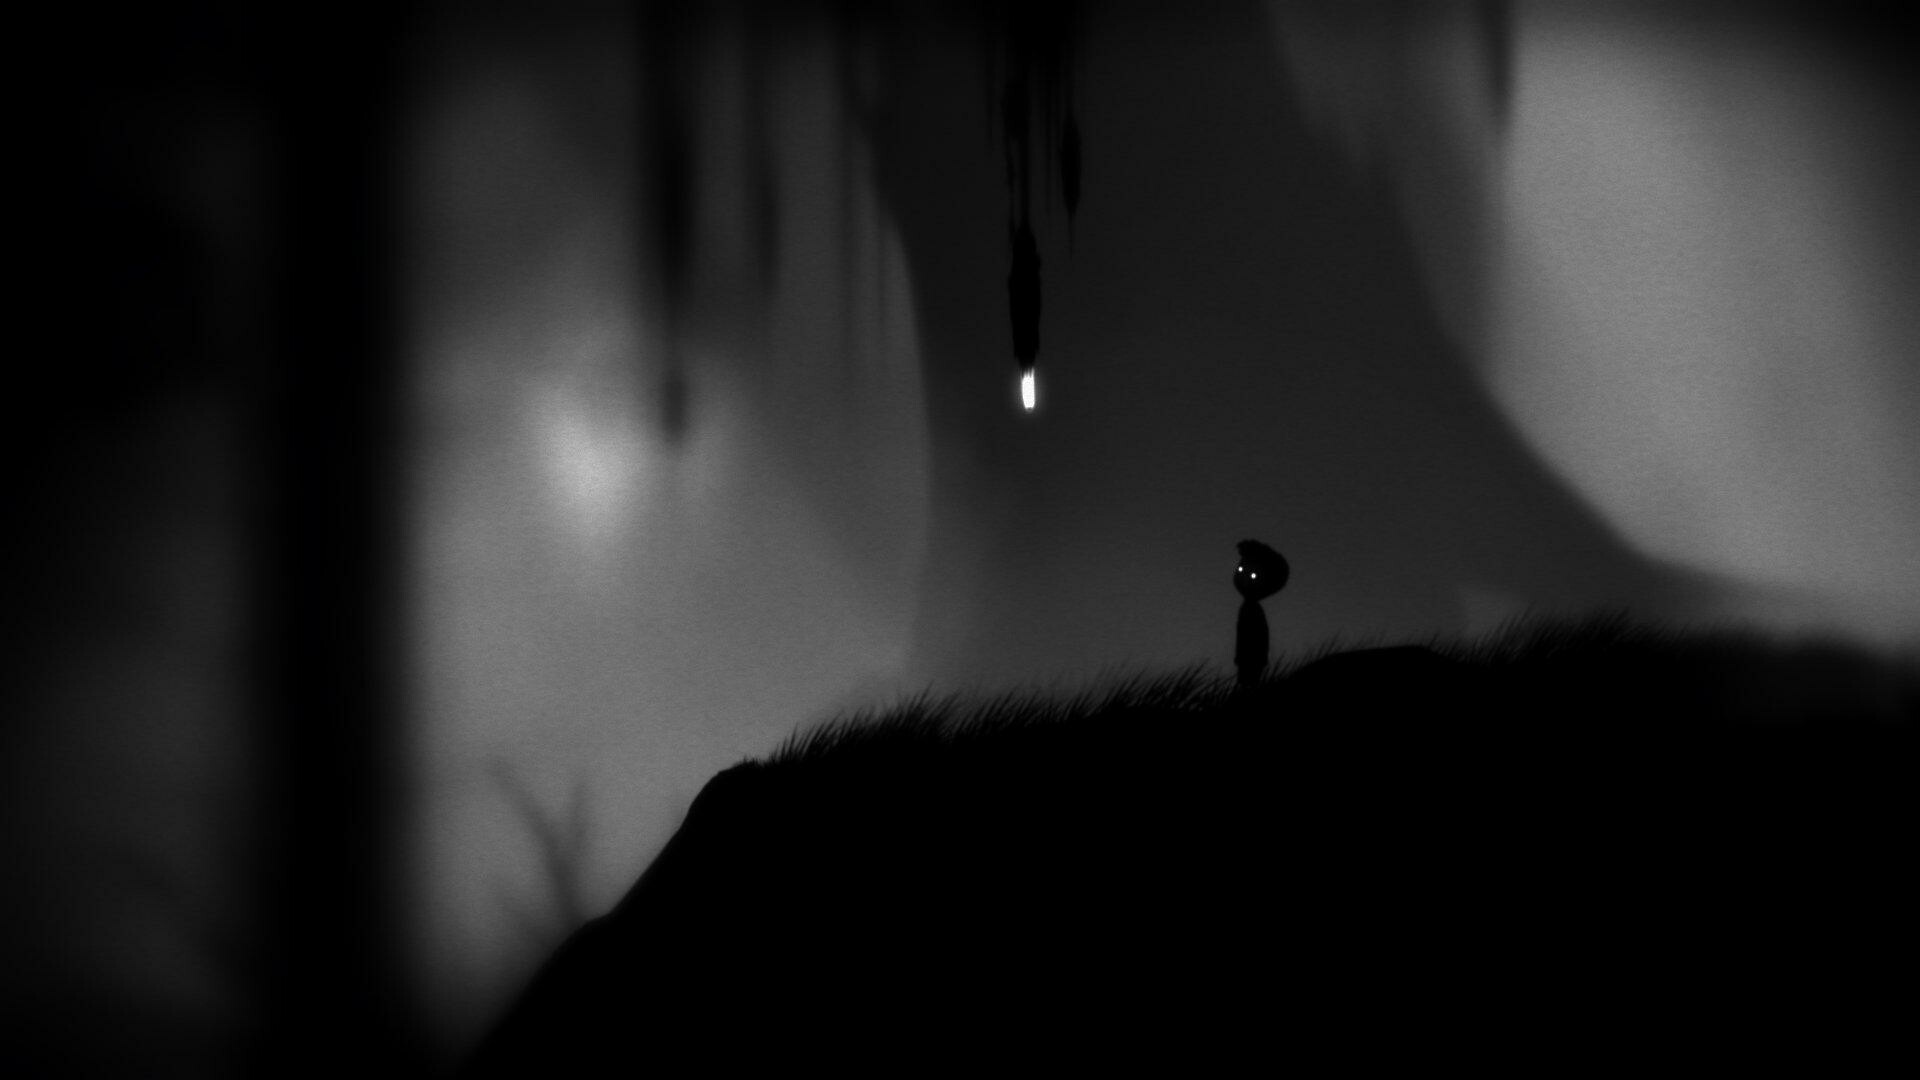 Limbo: The moody, monochromatic game, It has no colour, no dialogue, minimal music, no cut-scenes, no on-screen health meters or other clutter. 1920x1080 Full HD Wallpaper.